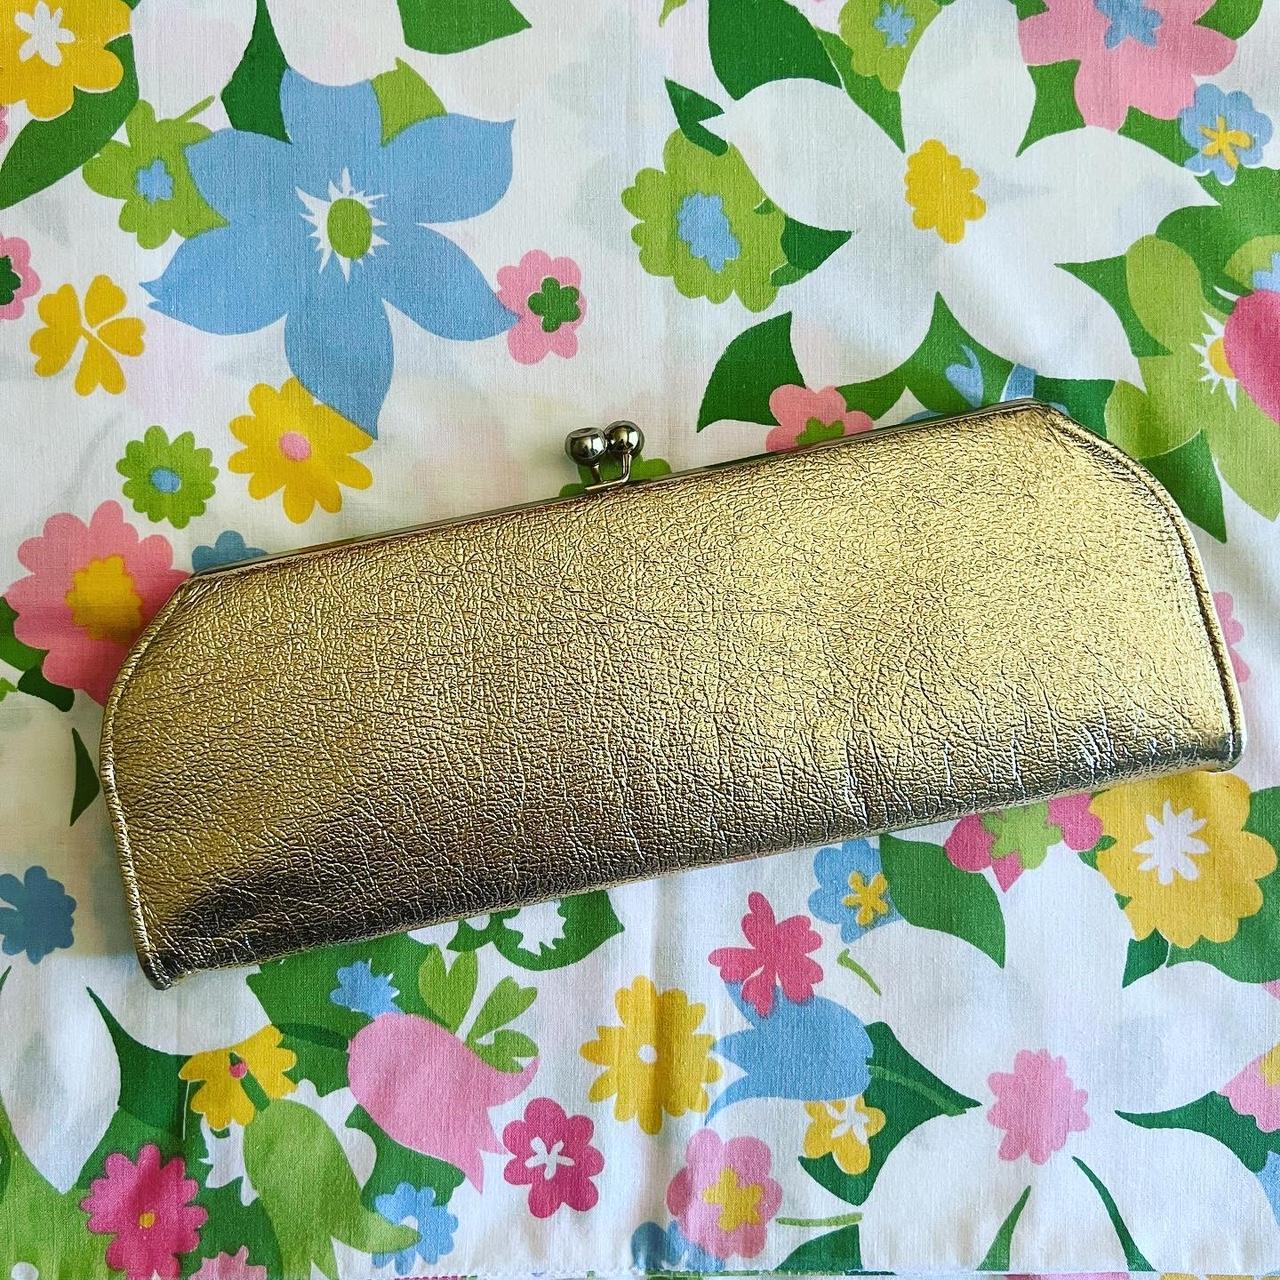 J. Crew Gold Pebble Leather Envelope Clutch Shoulder Bag | Envelope clutch,  Leather clutch purse, Purses and handbags